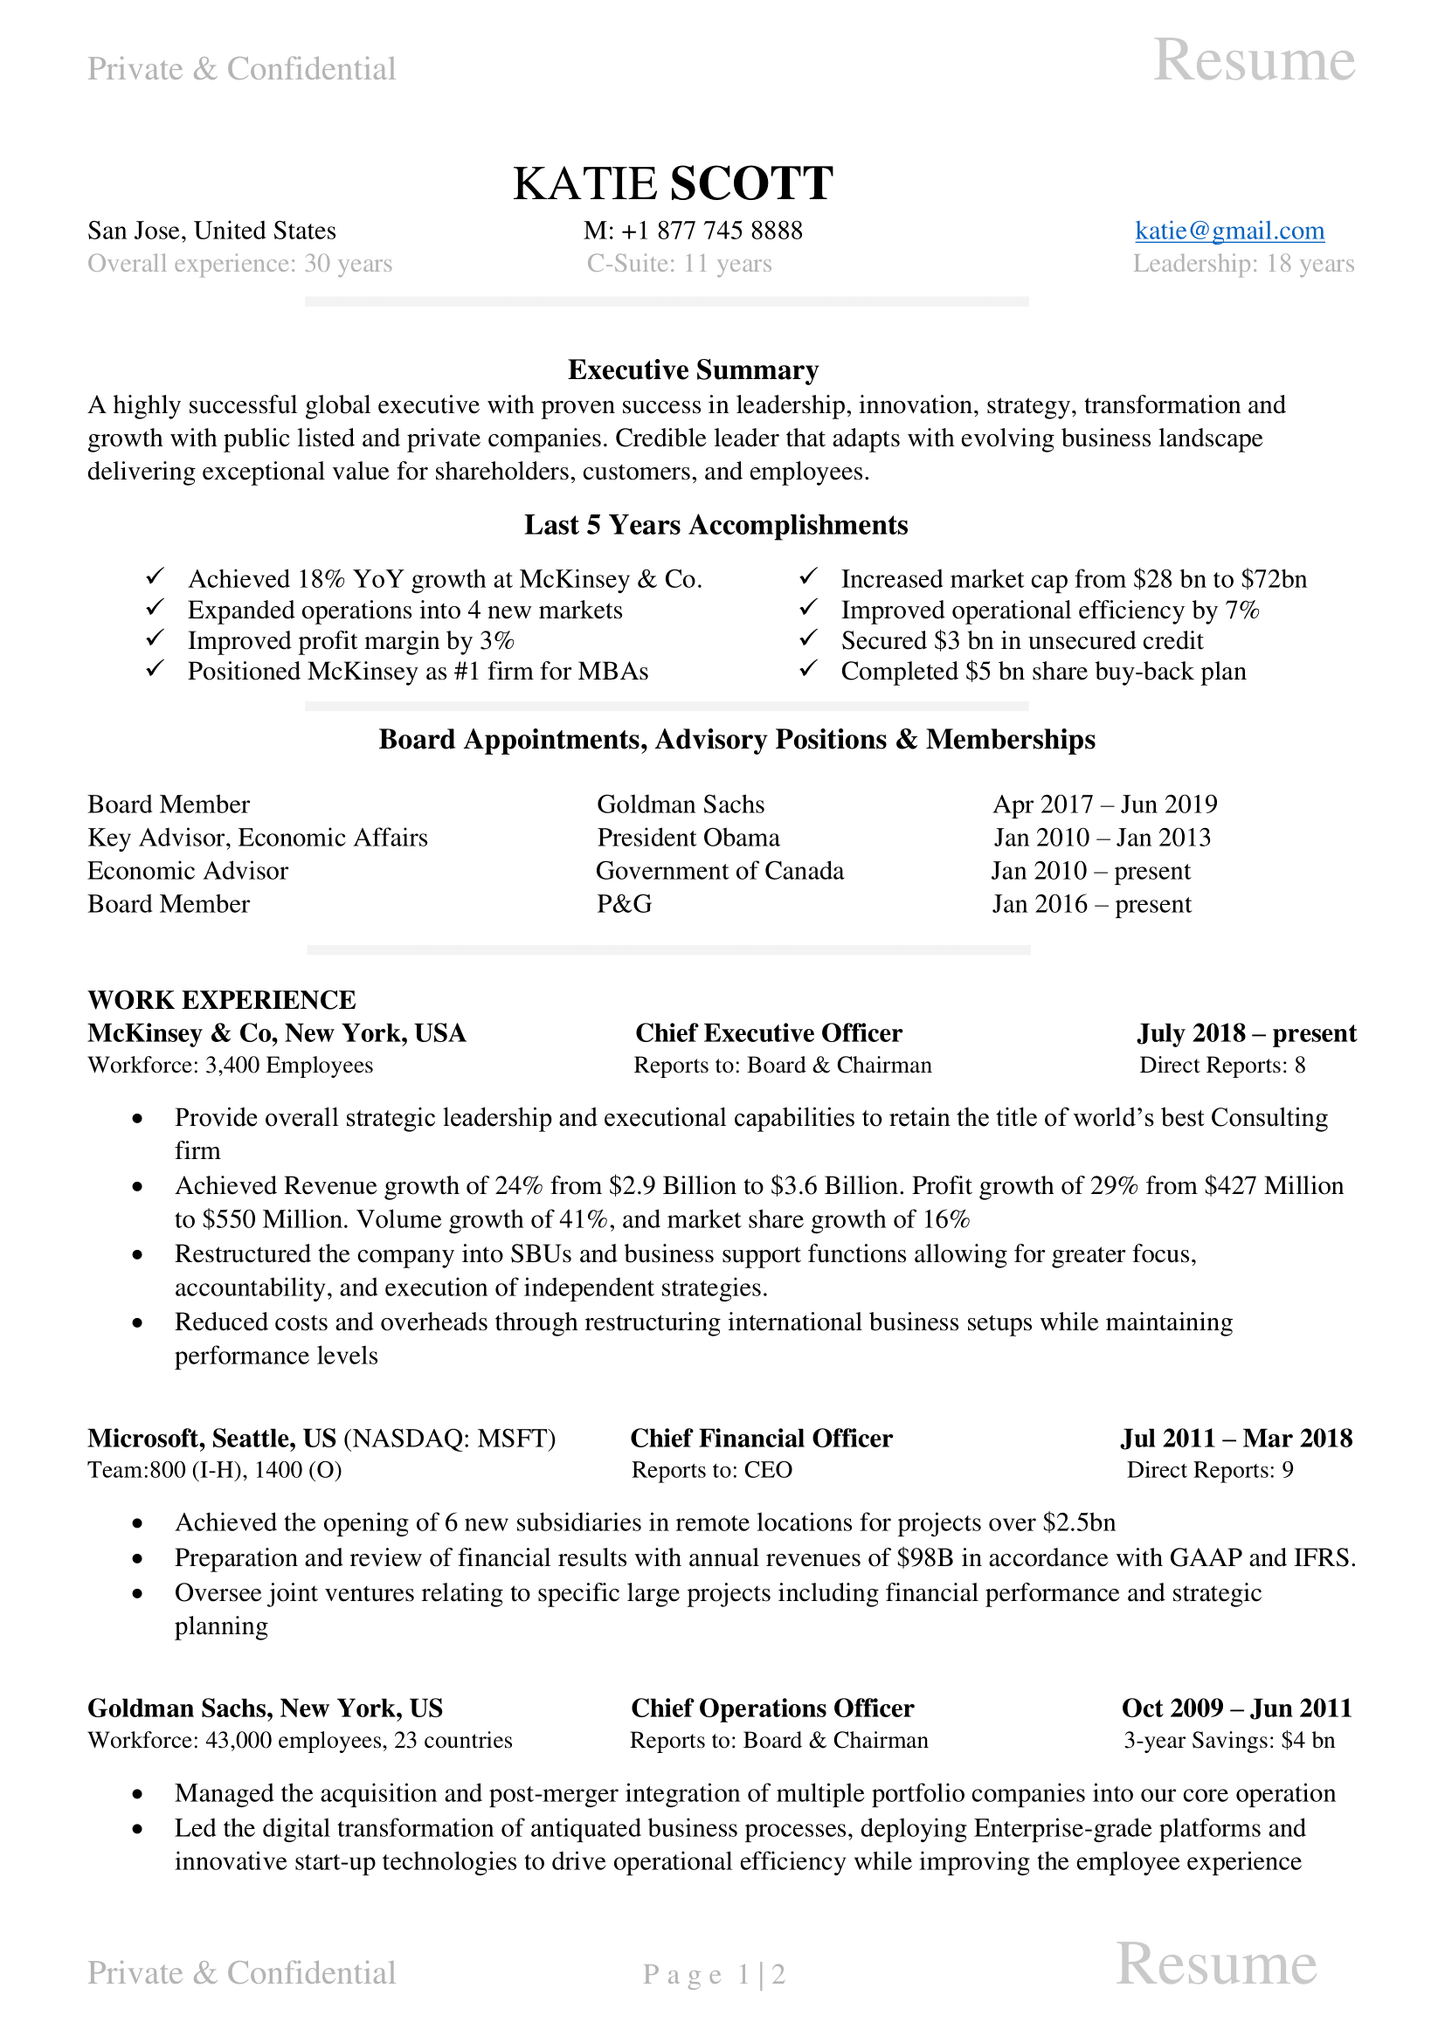 Executive Resume Template PRO V4 - Chief Executive Officer, Chief Financial Officer